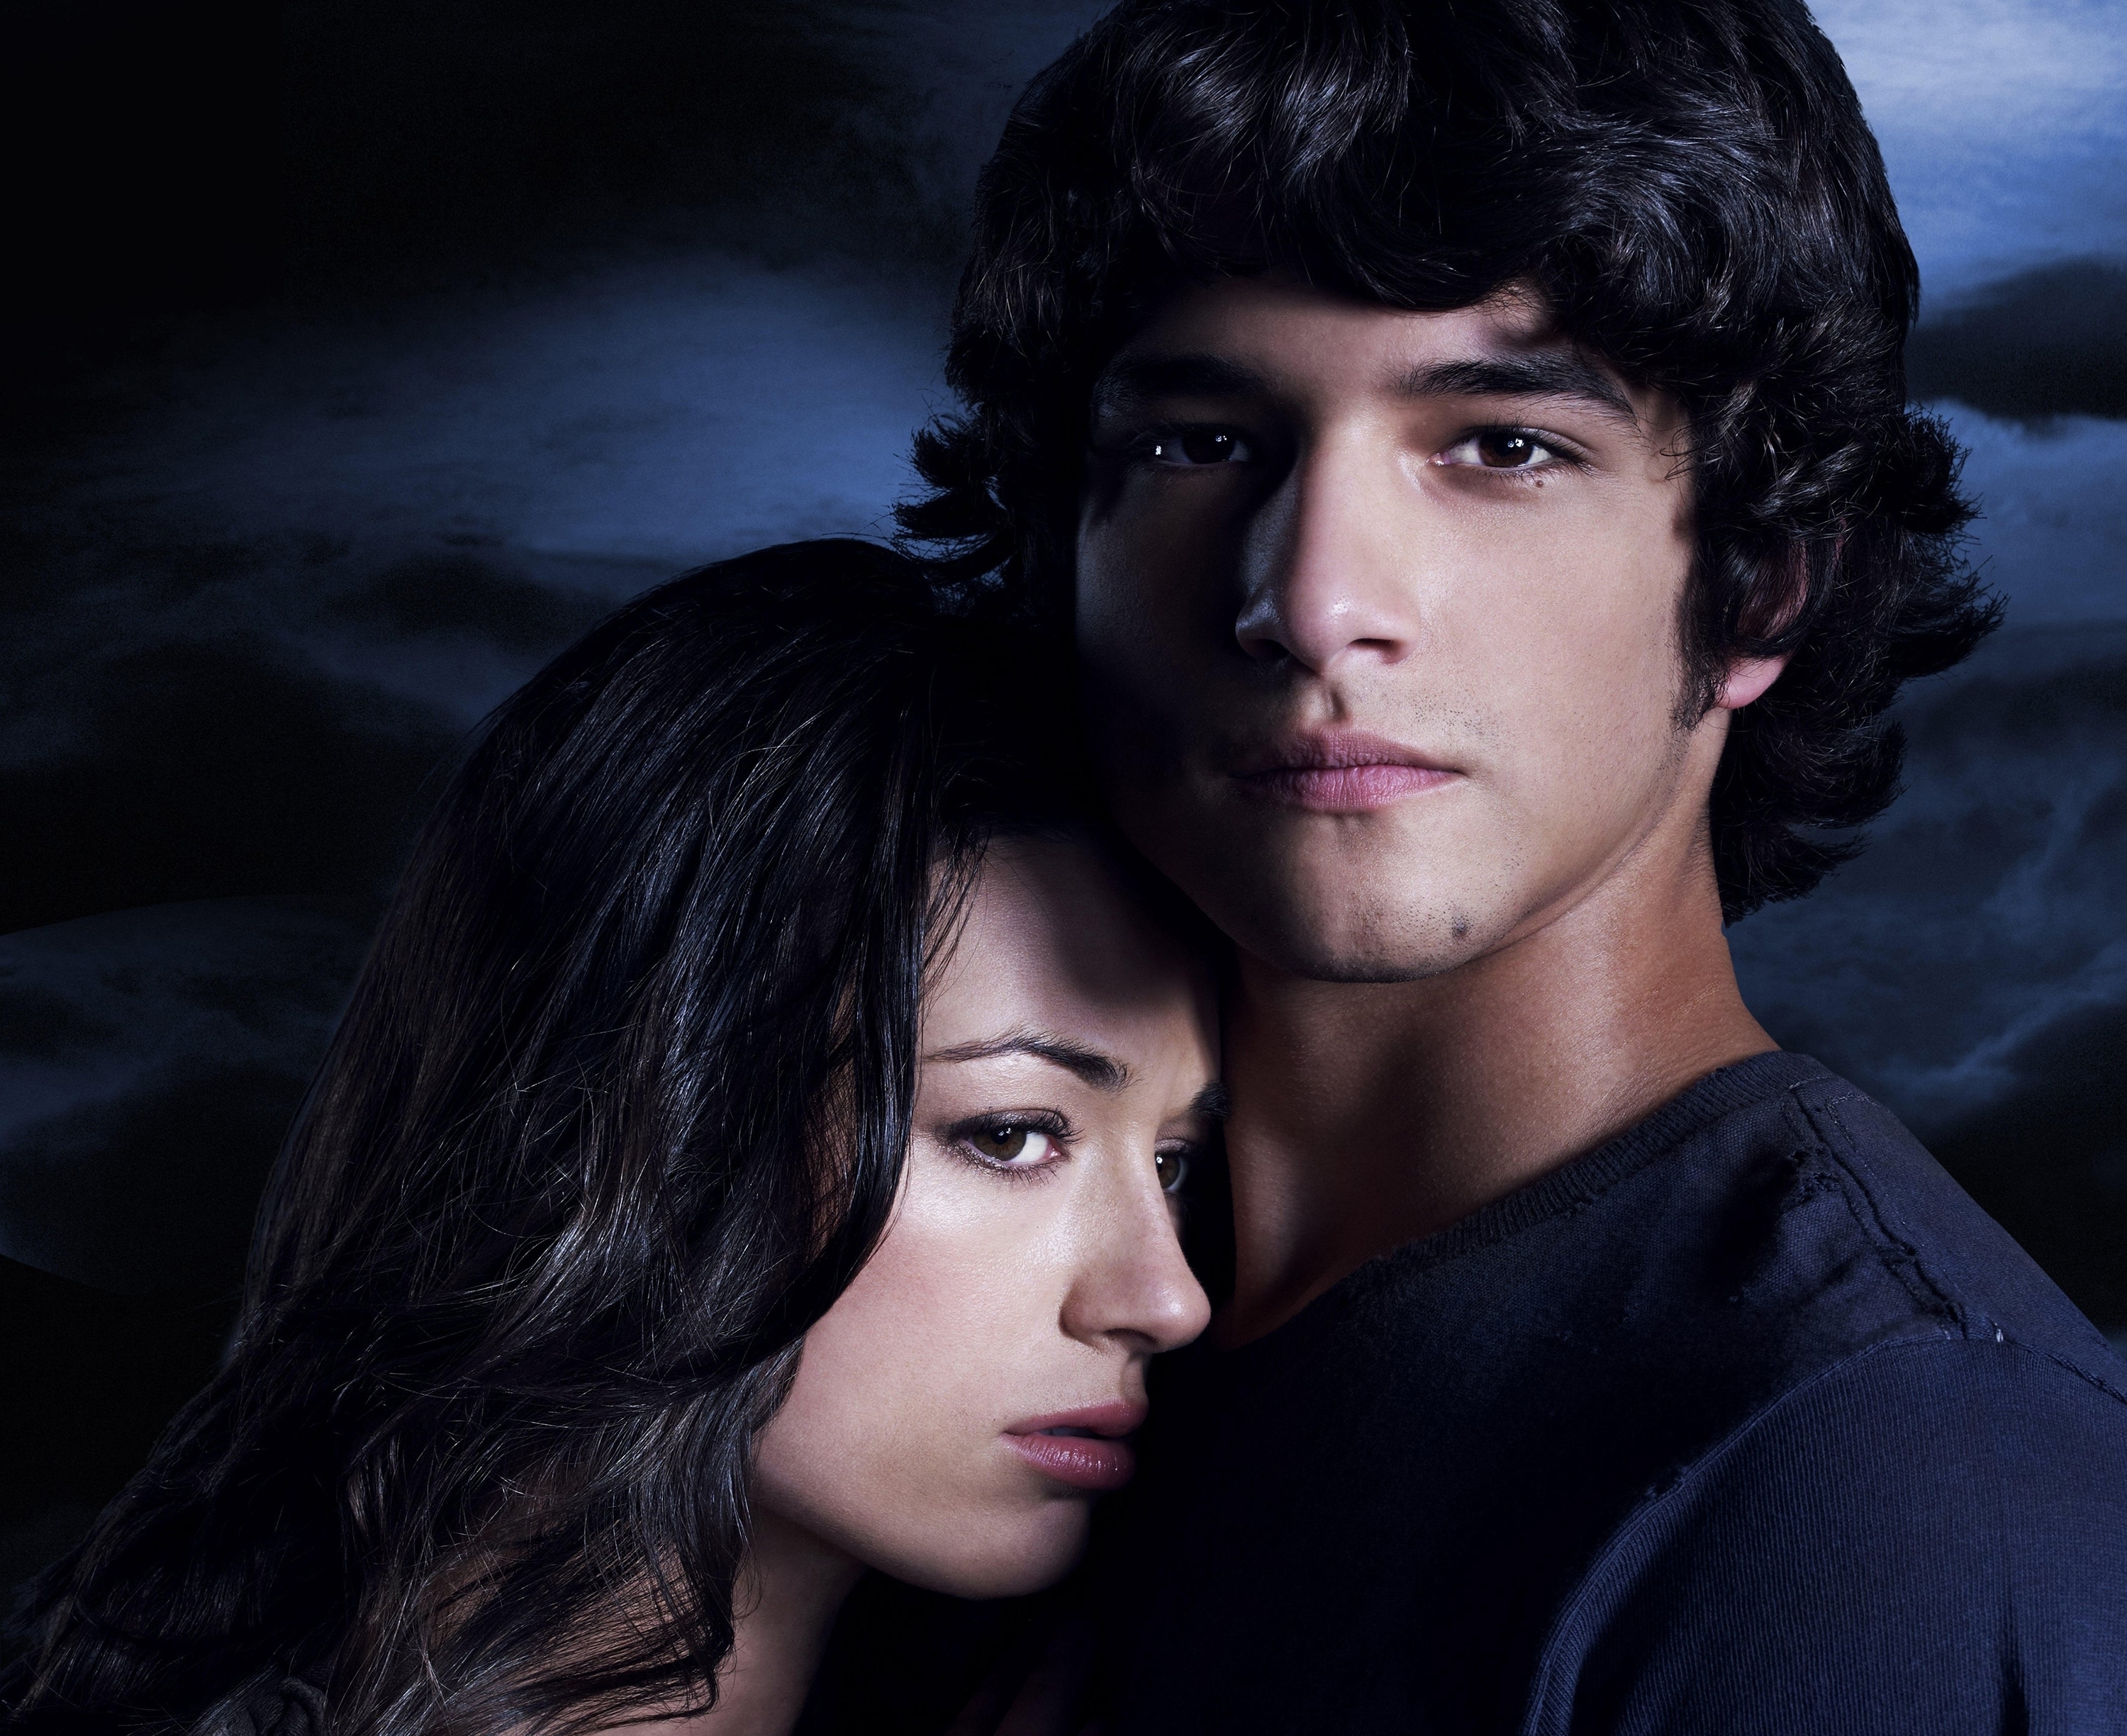 TV Show Teen Wolf HD Wallpaper | Background Image